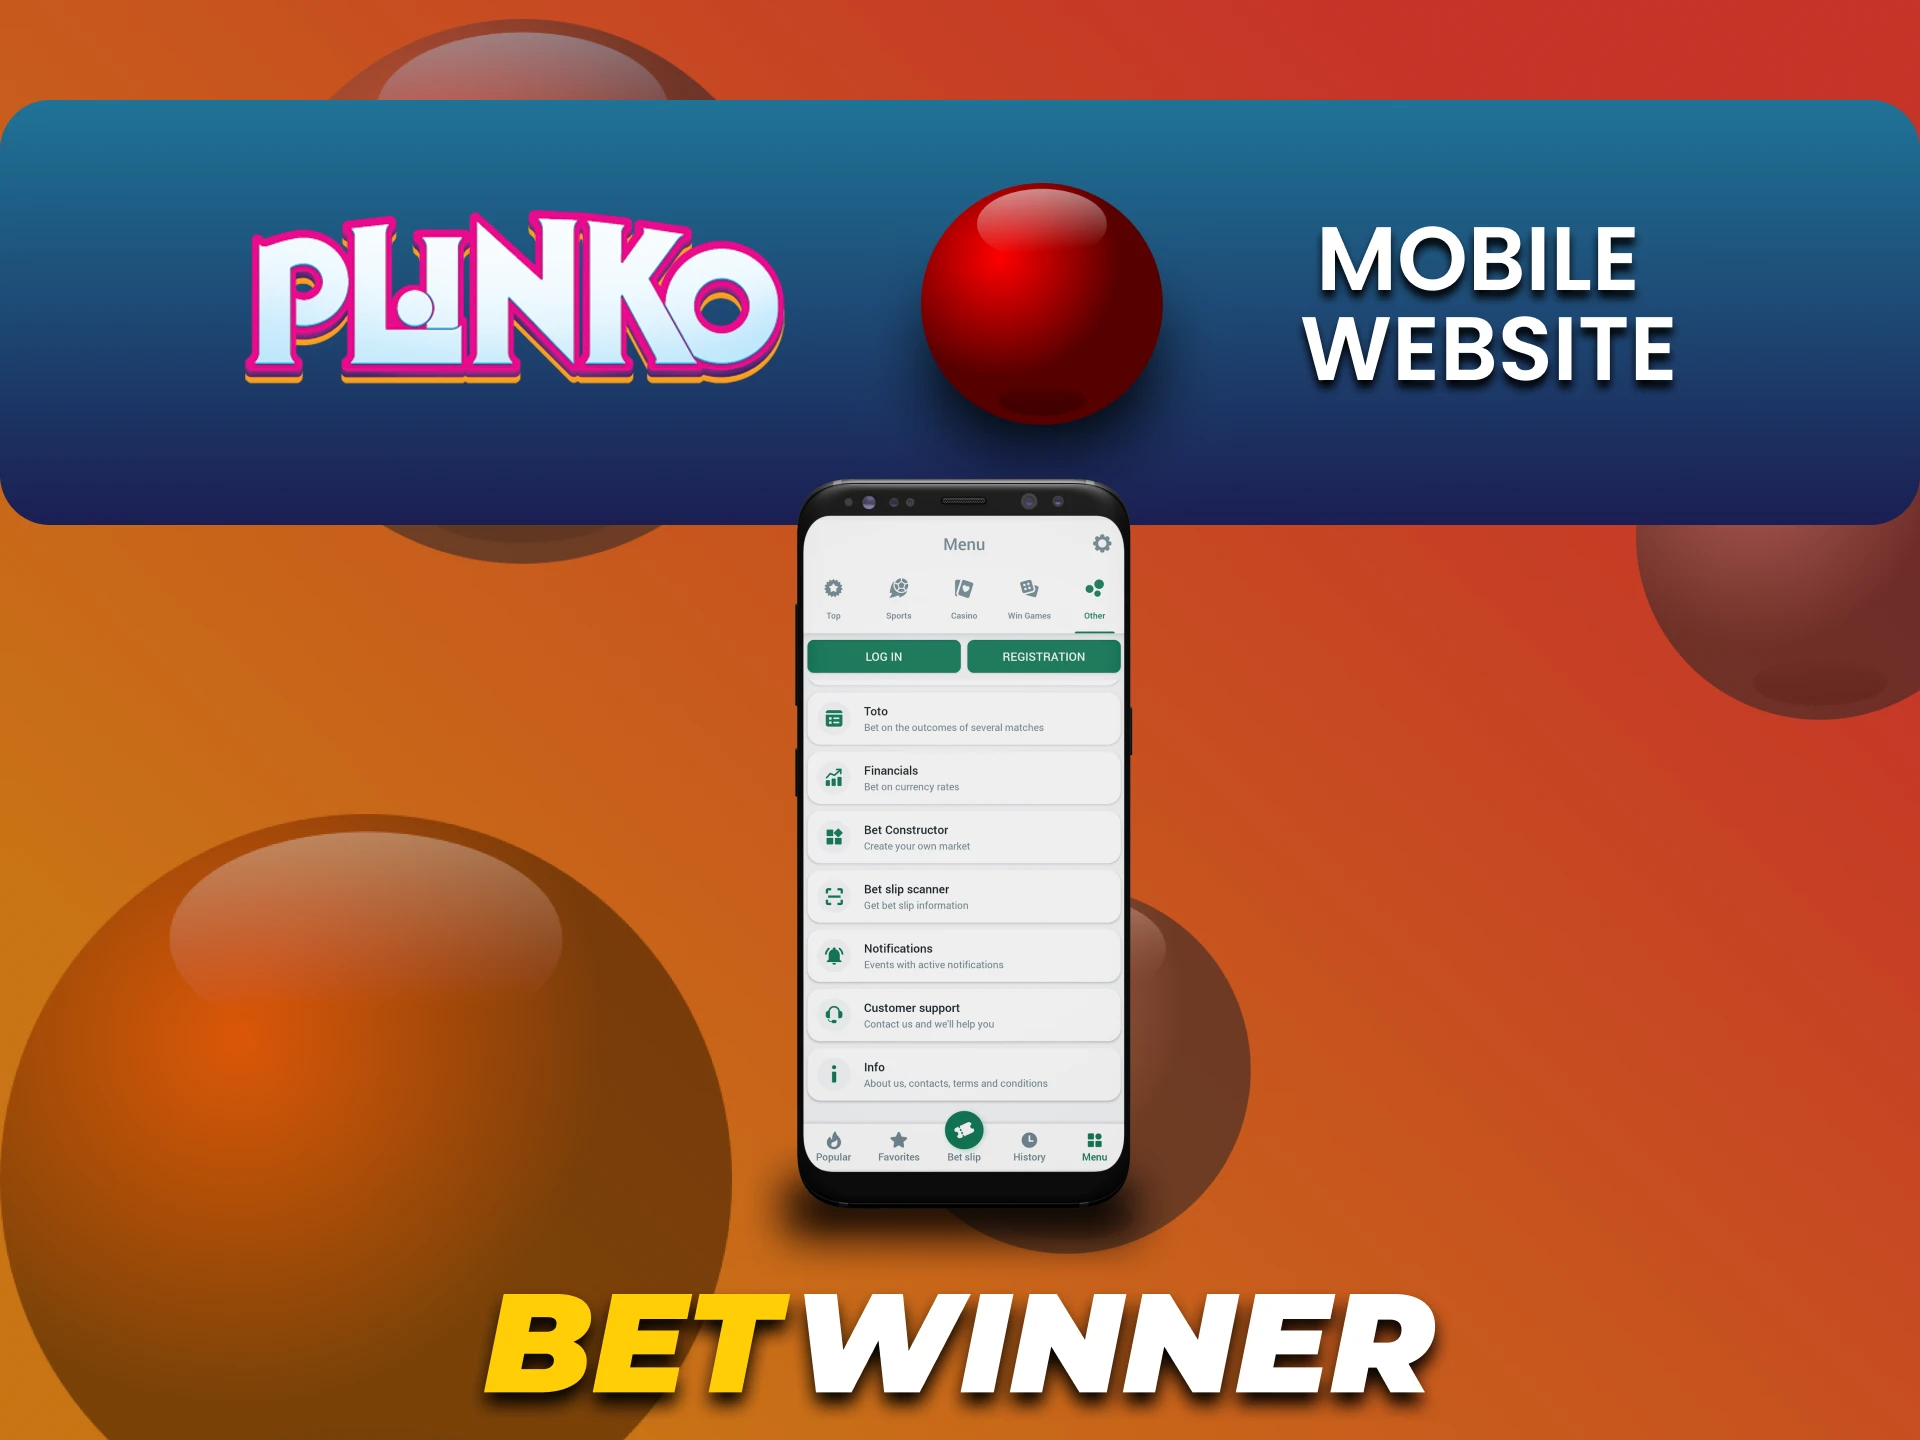 Use your mobile phone to play Plinko on Betwinner.